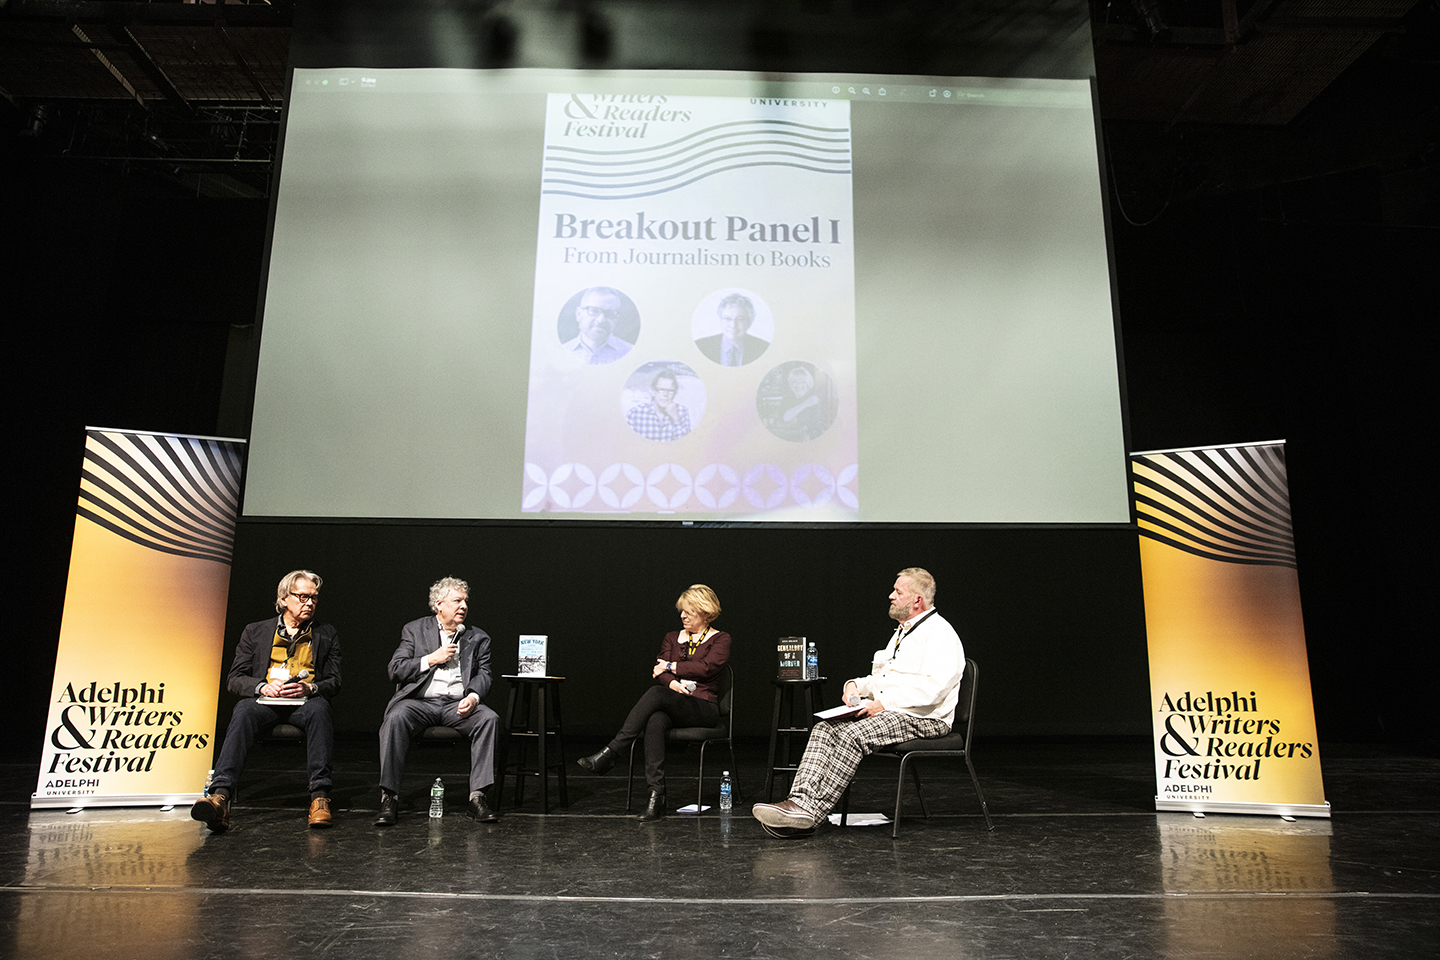 The four panelists on stage and in conversation. A screen behind them announces the name of the event: Breakout Panel 1: From Journalism to Books. The screen also has small headshots of each of the writers.